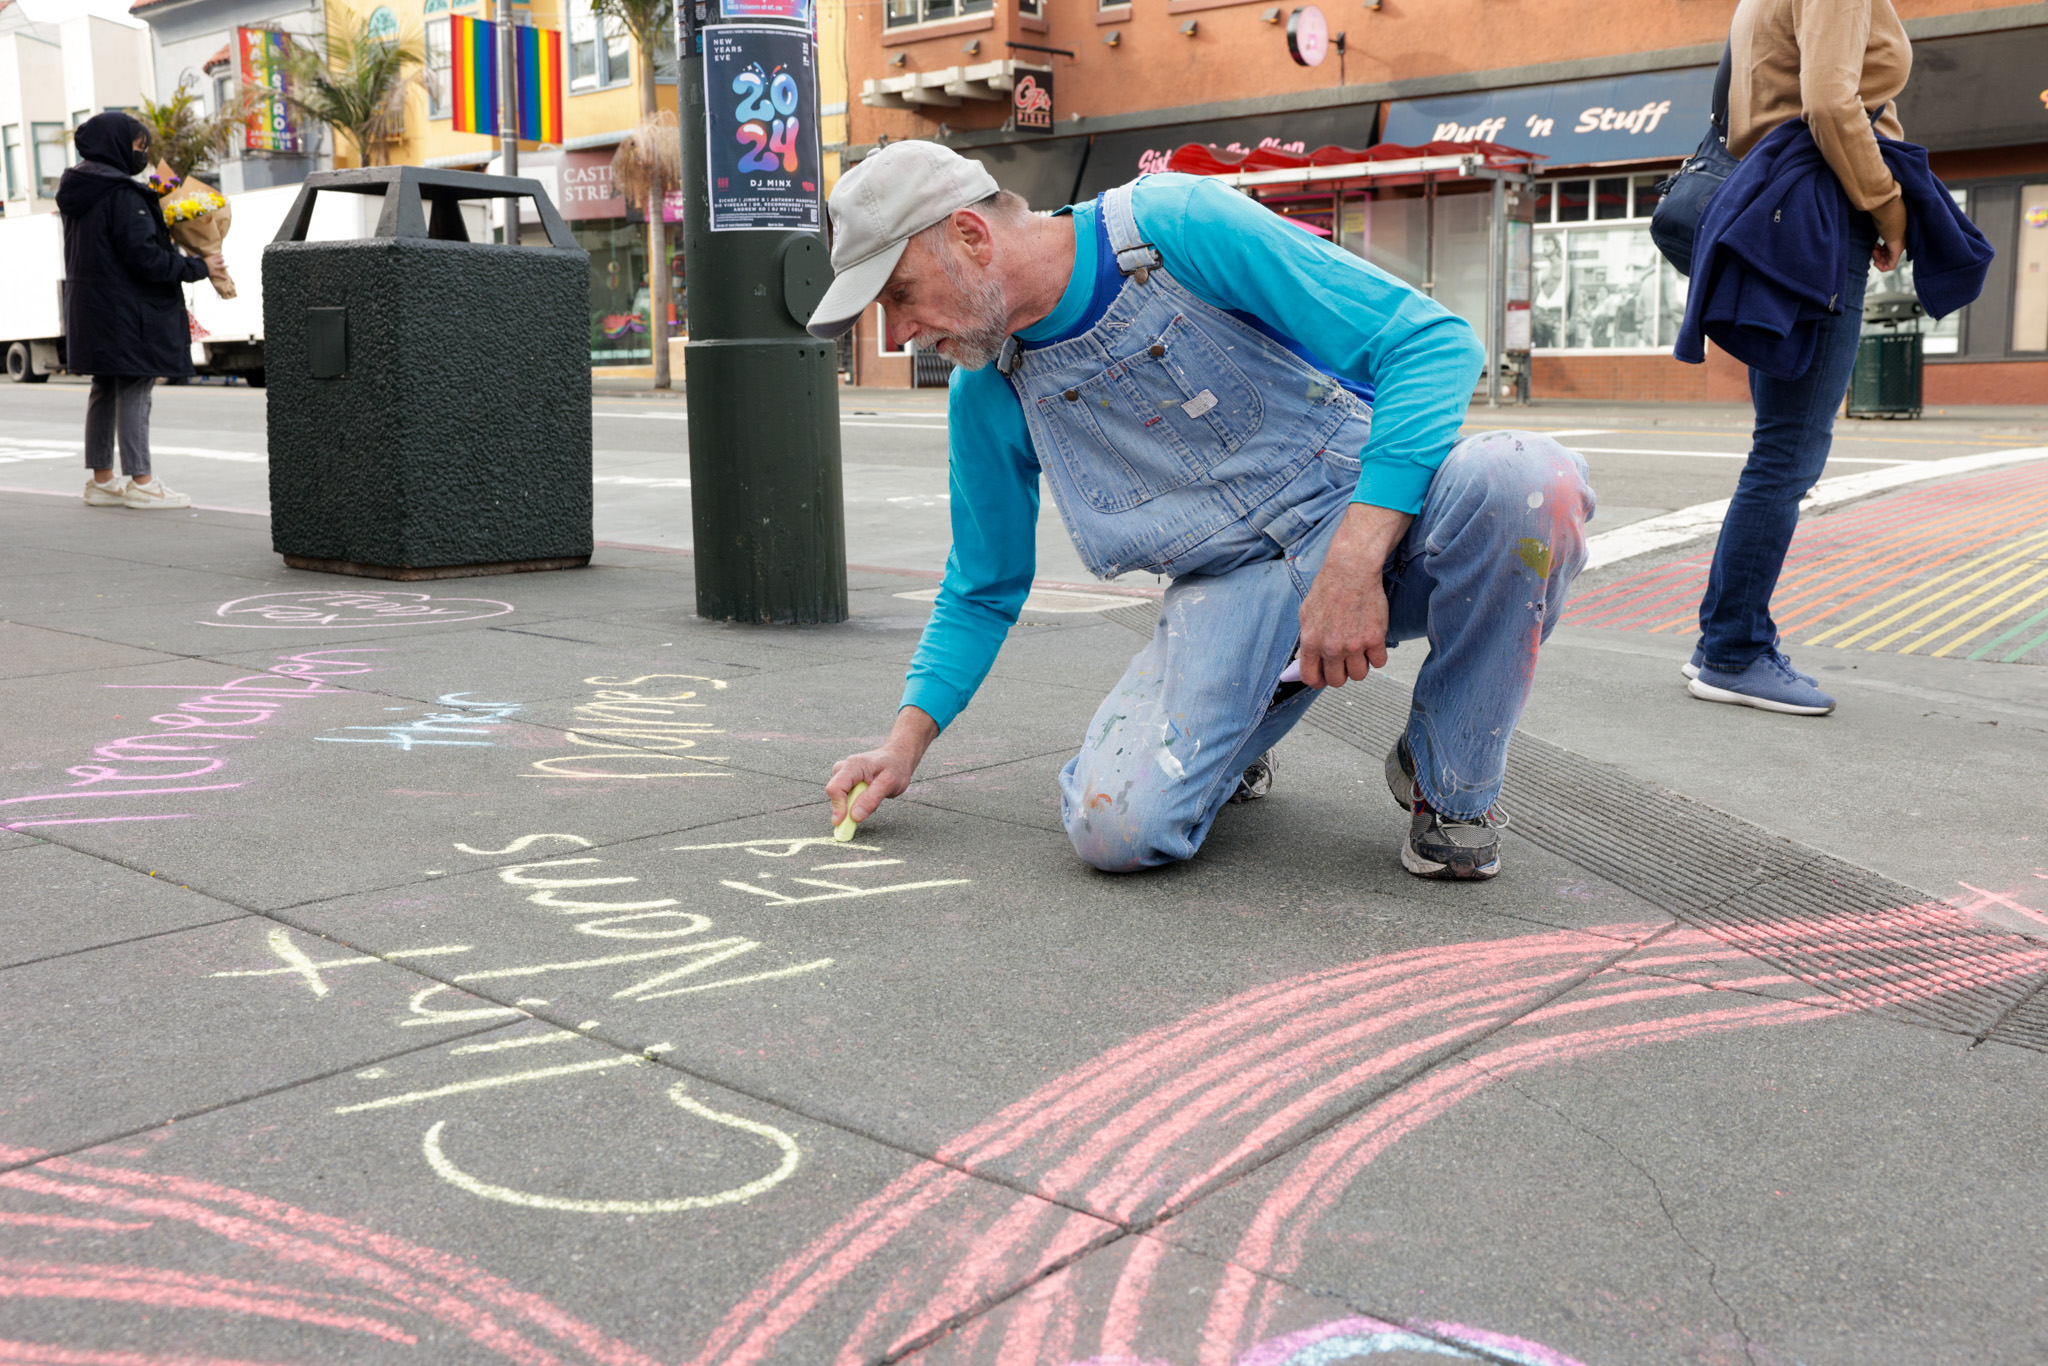 A man wearing a beige-colored baseball cap, a blue long-sleeved shirt and blue denim overalls crouches close to the ground. He has a piece of yellow chalk in his hand and is writing on the ground. A person can be seen behind him in the background to his right, and a telephone poll and trash can are to his left in the background.